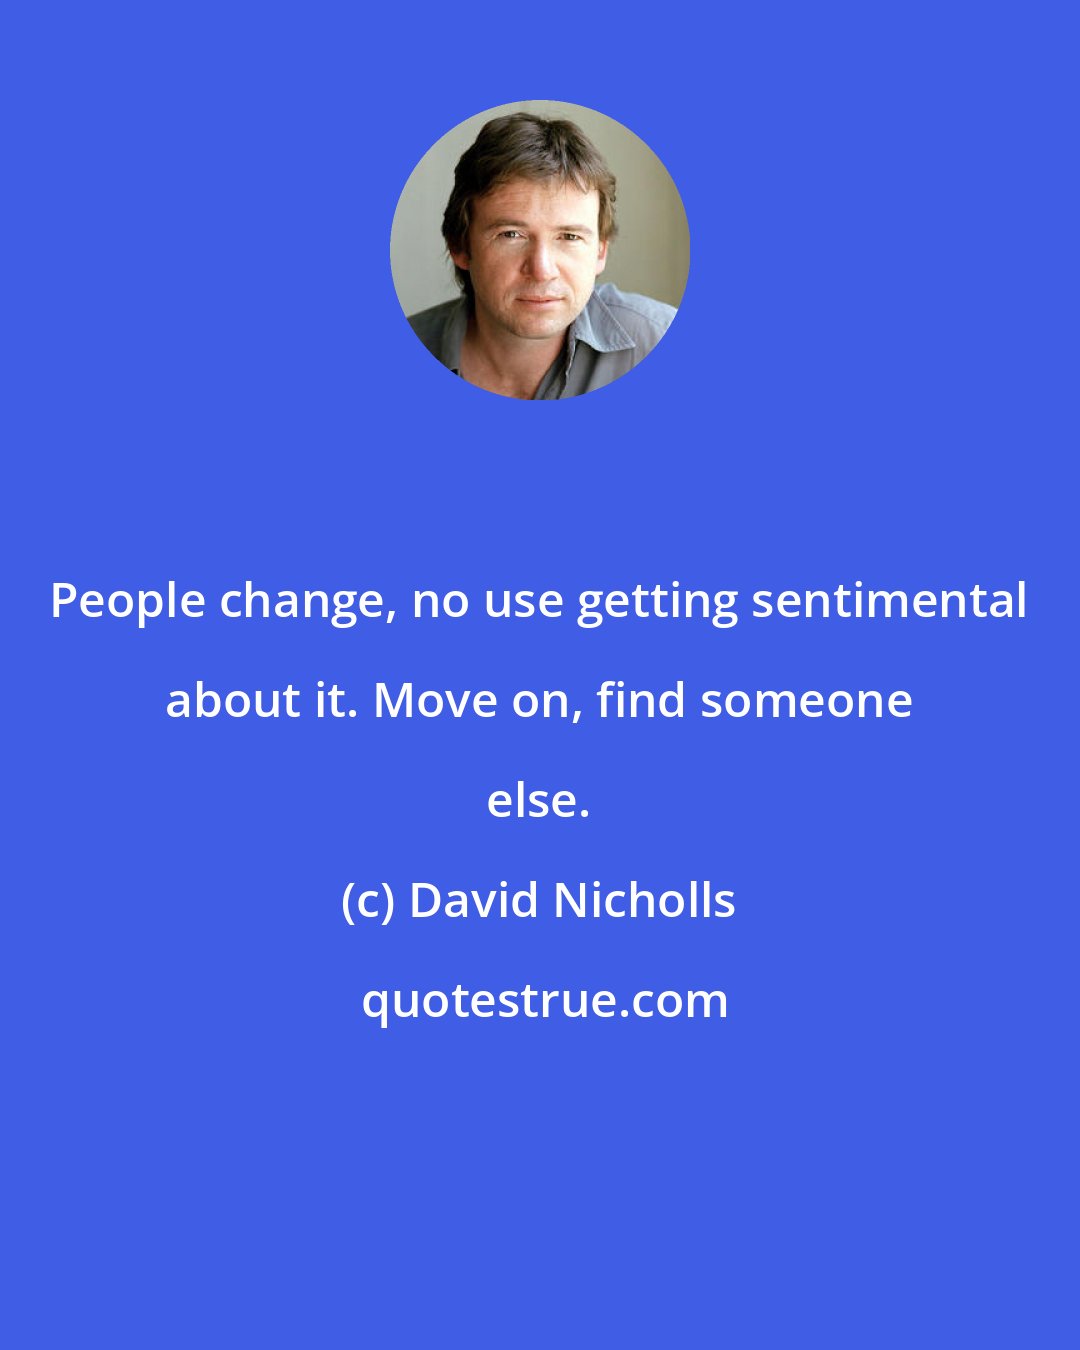 David Nicholls: People change, no use getting sentimental about it. Move on, find someone else.